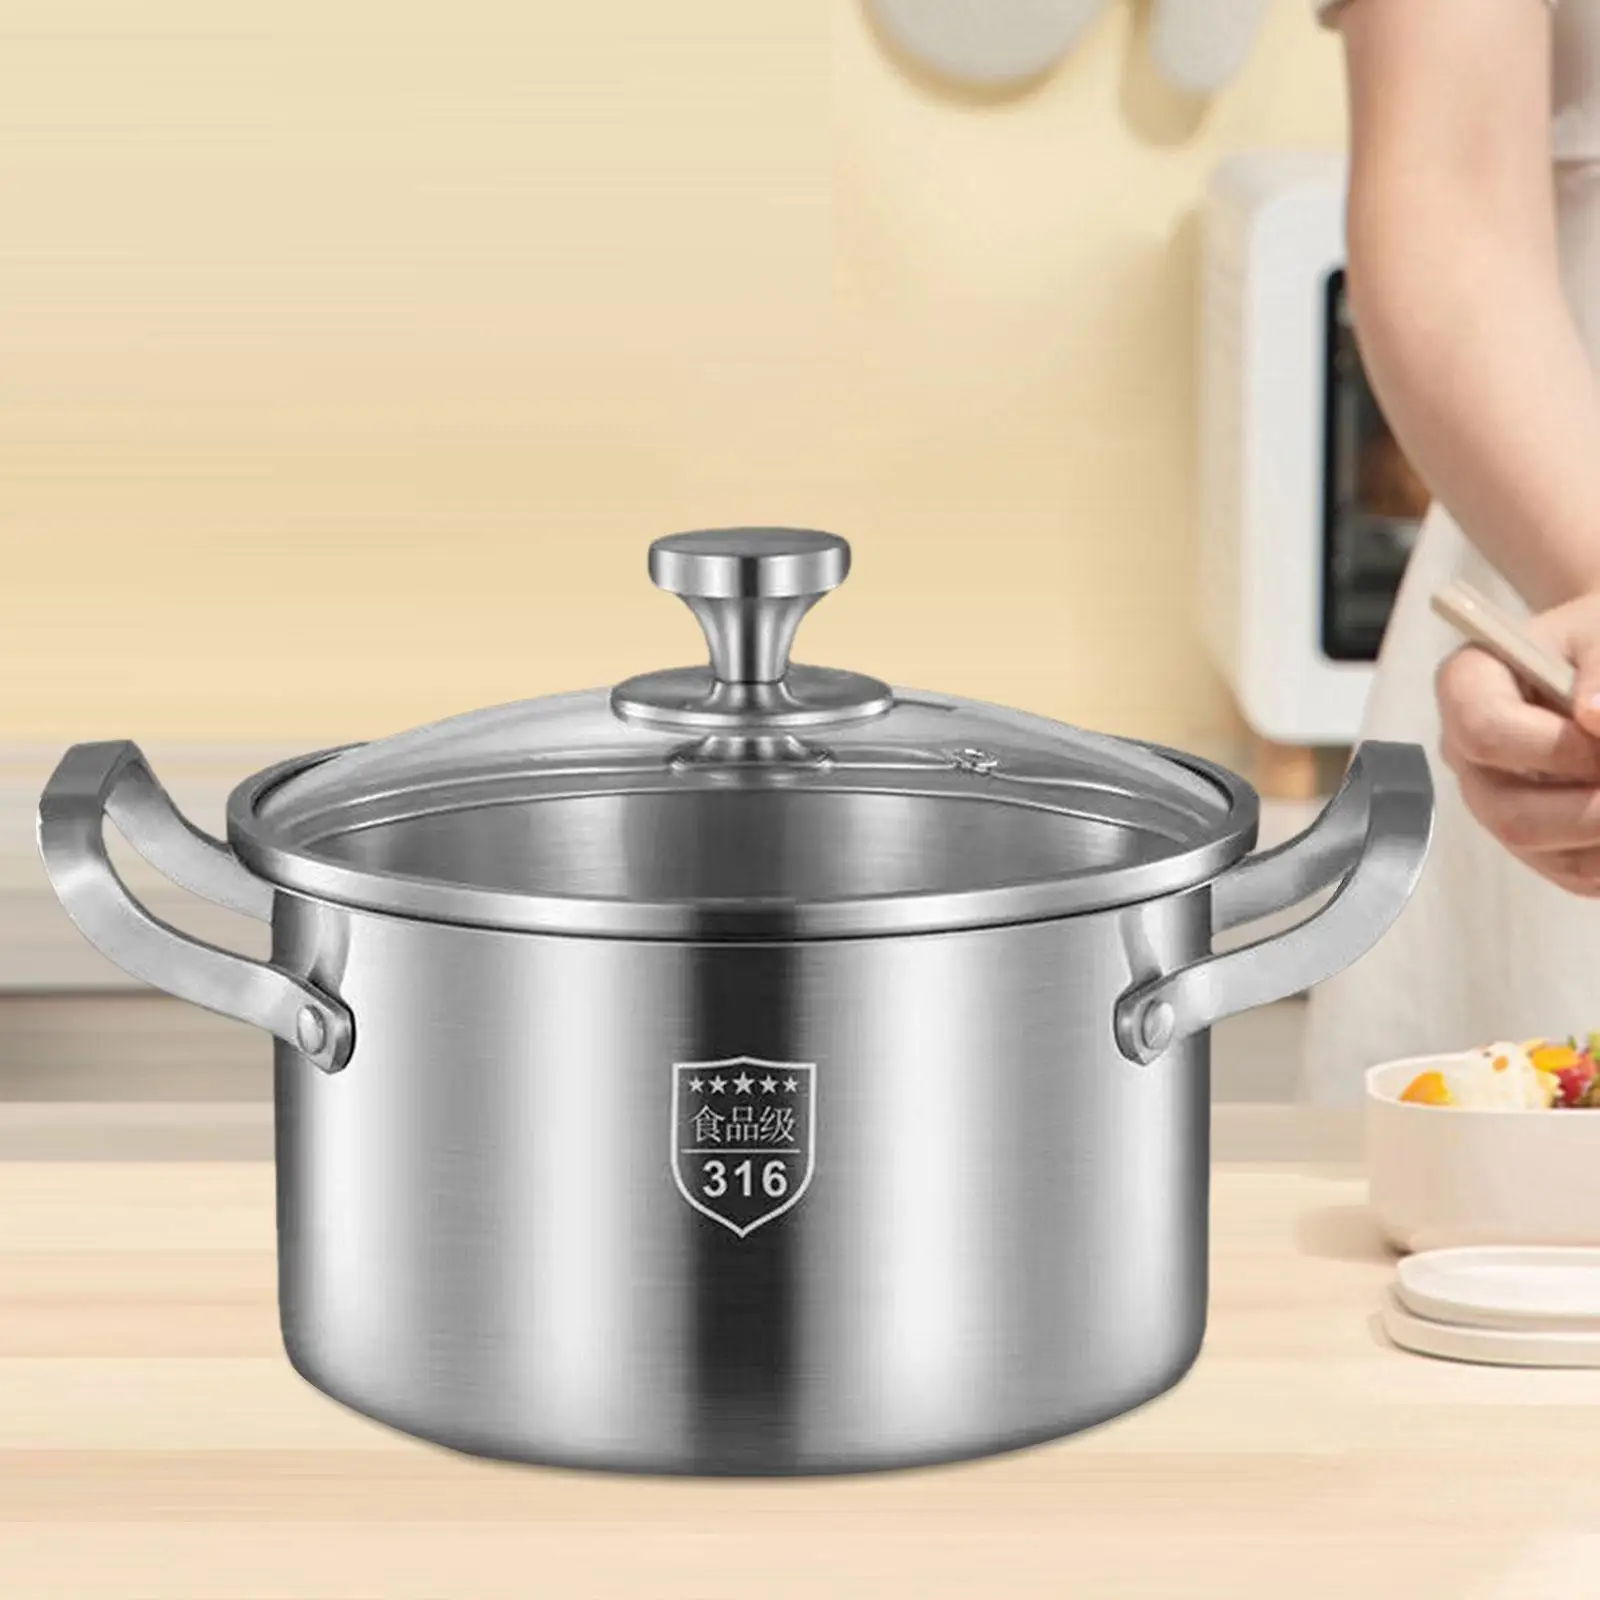 Soup Pot, Stockpot Stainless Steel Cooking Pot, for Home Bar Kitchen Restaurant